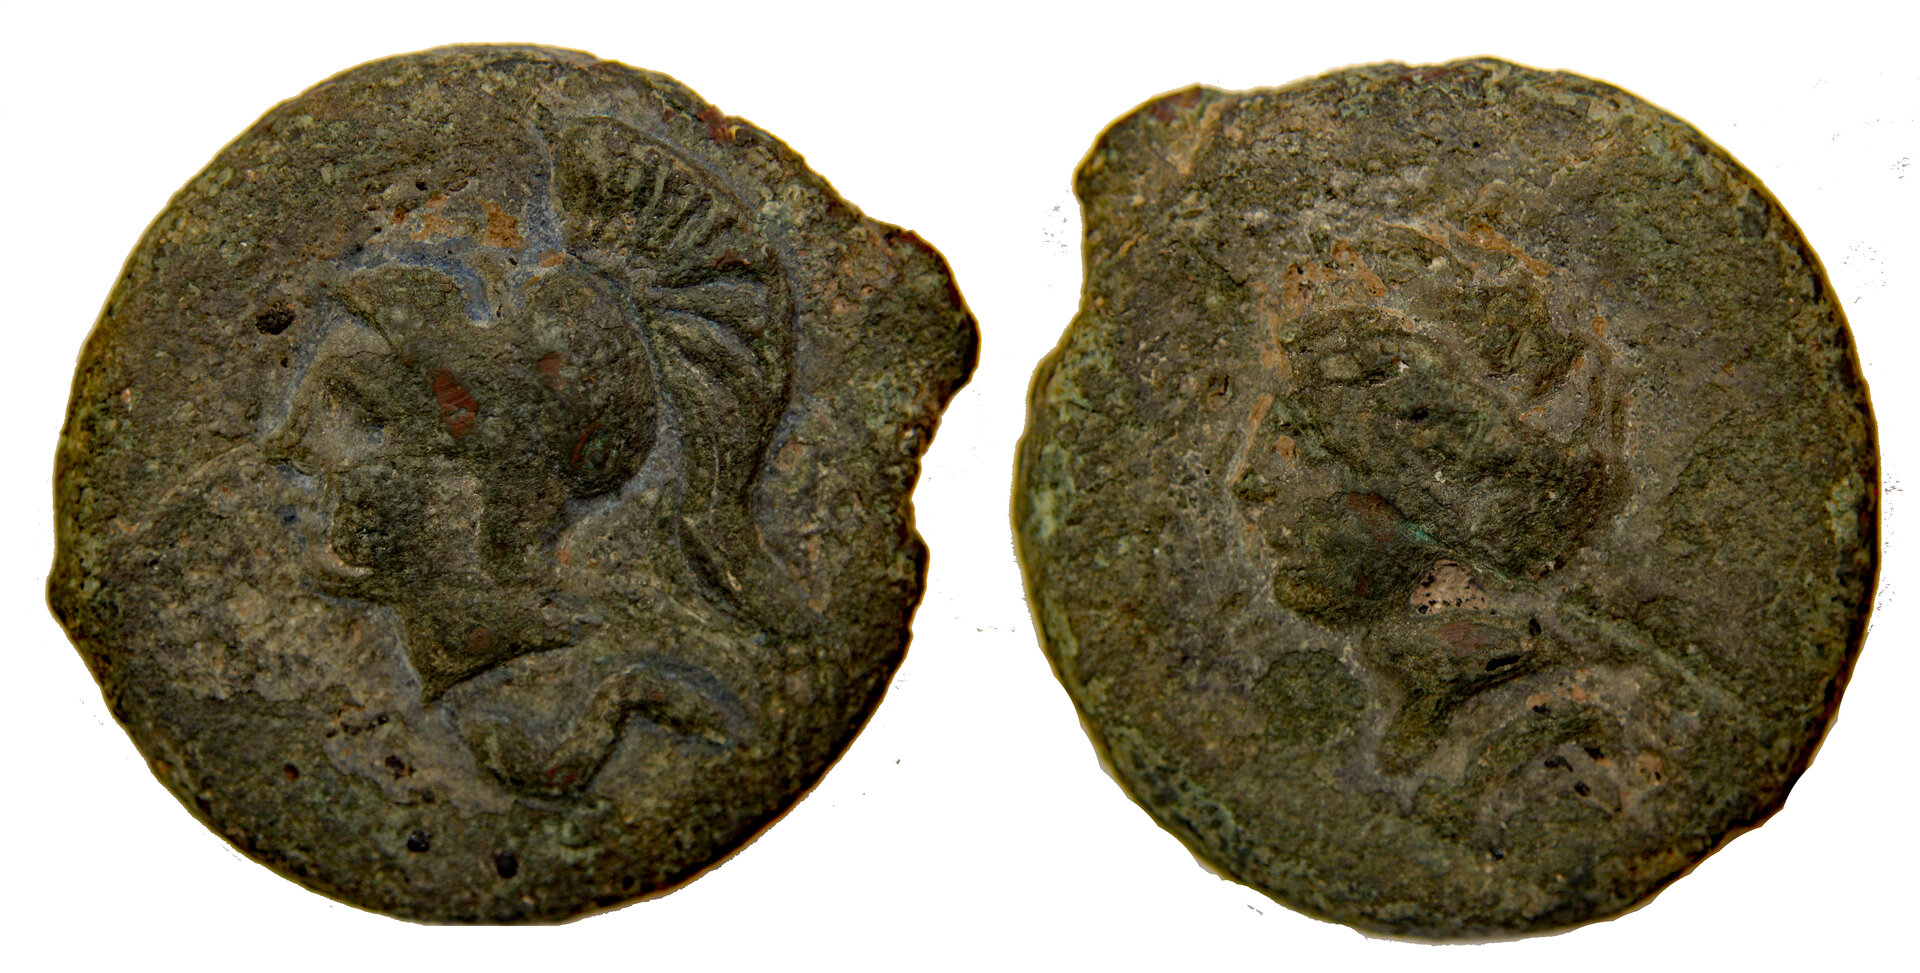 D-Camera Roman Republic, 241-235 BC  reformated Anonymous. Aes Grave, HJB1-29-22.jpg